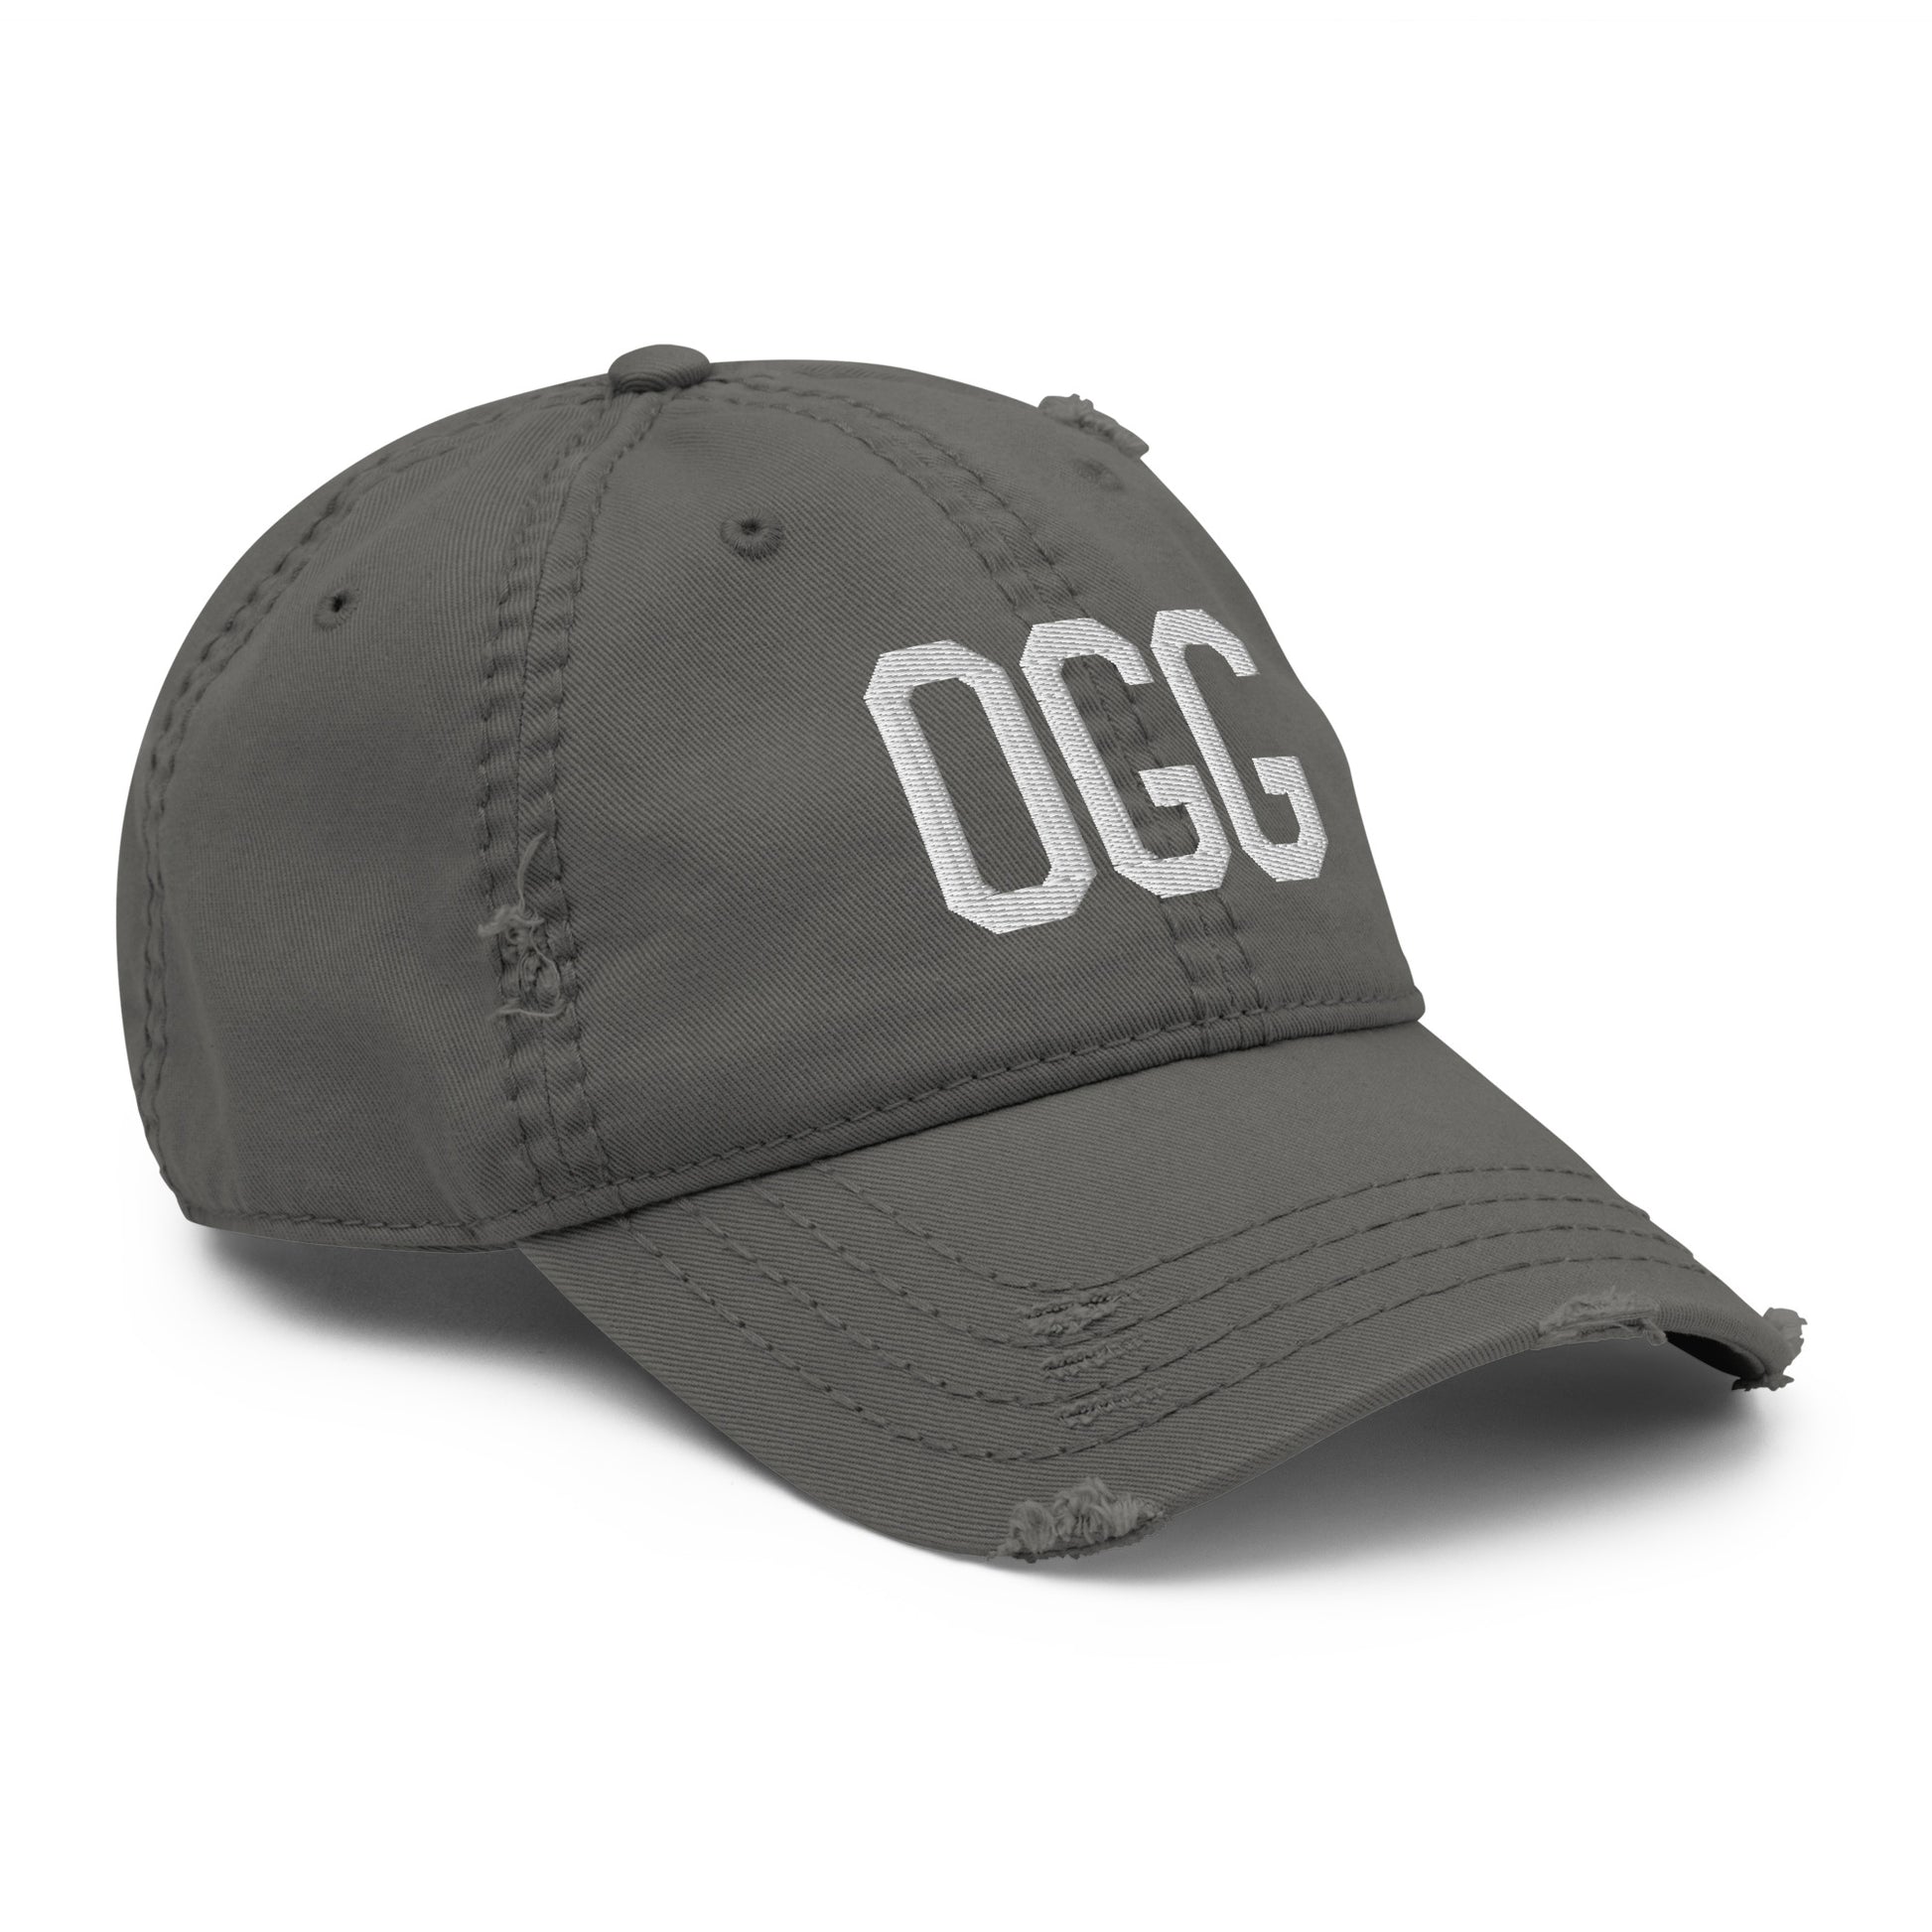 Airport Code Distressed Hat - White • OGG Maui • YHM Designs - Image 17